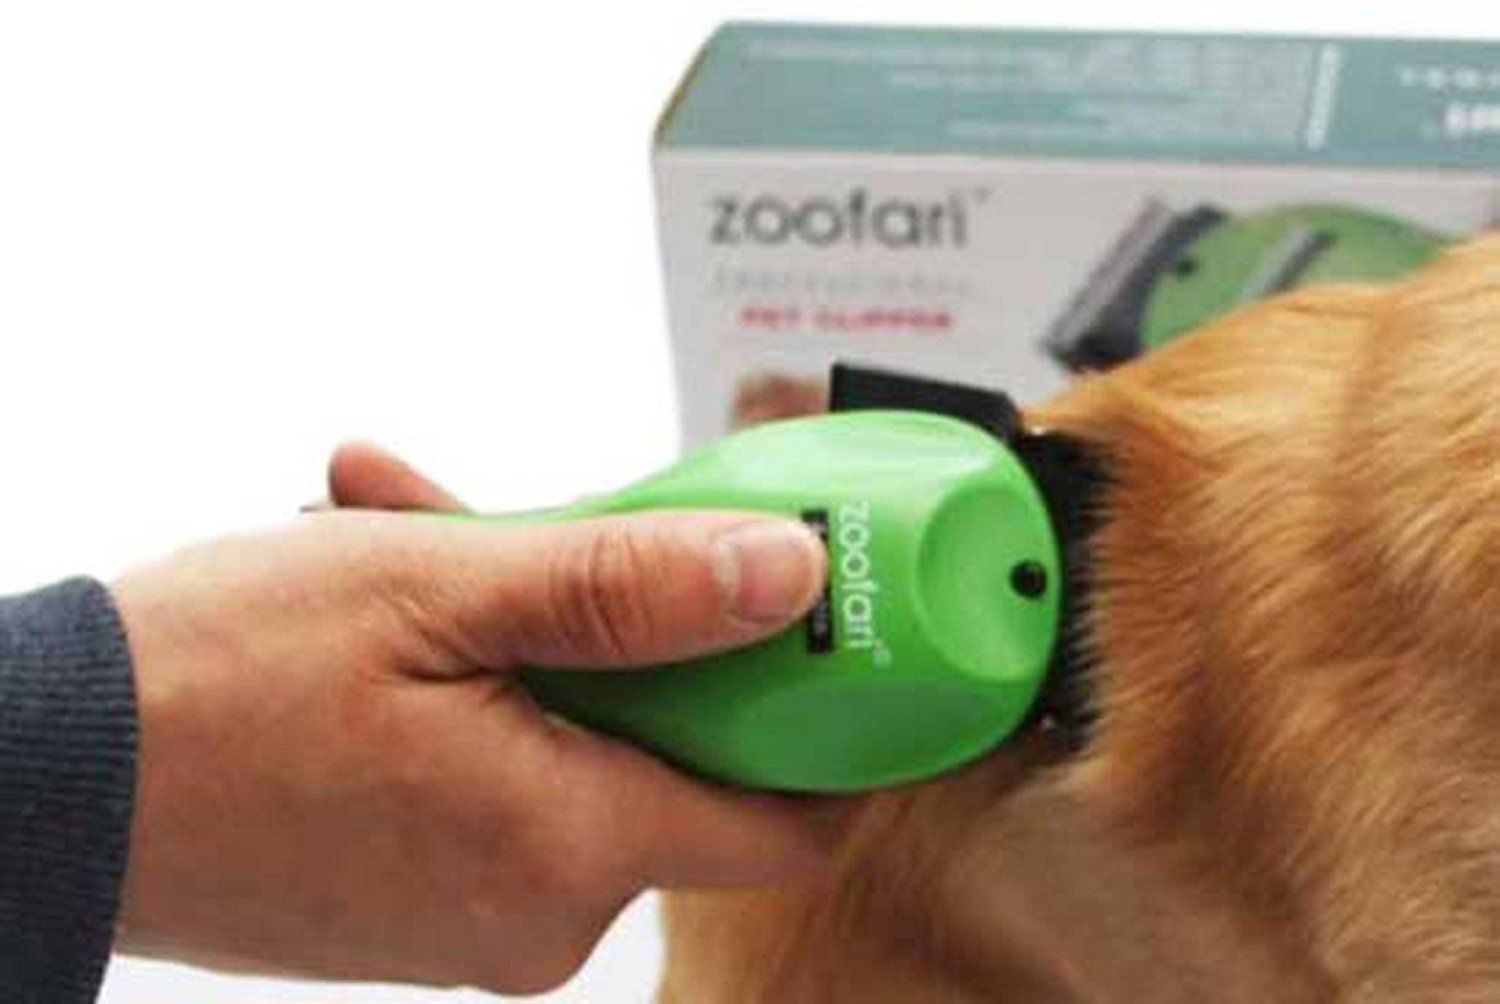 Zoofari Professional Adjustable Pet Trimmer Set Buy Zoofari Professional Adjustable Pet Trimmer Set Online At Low Price Snapdeal